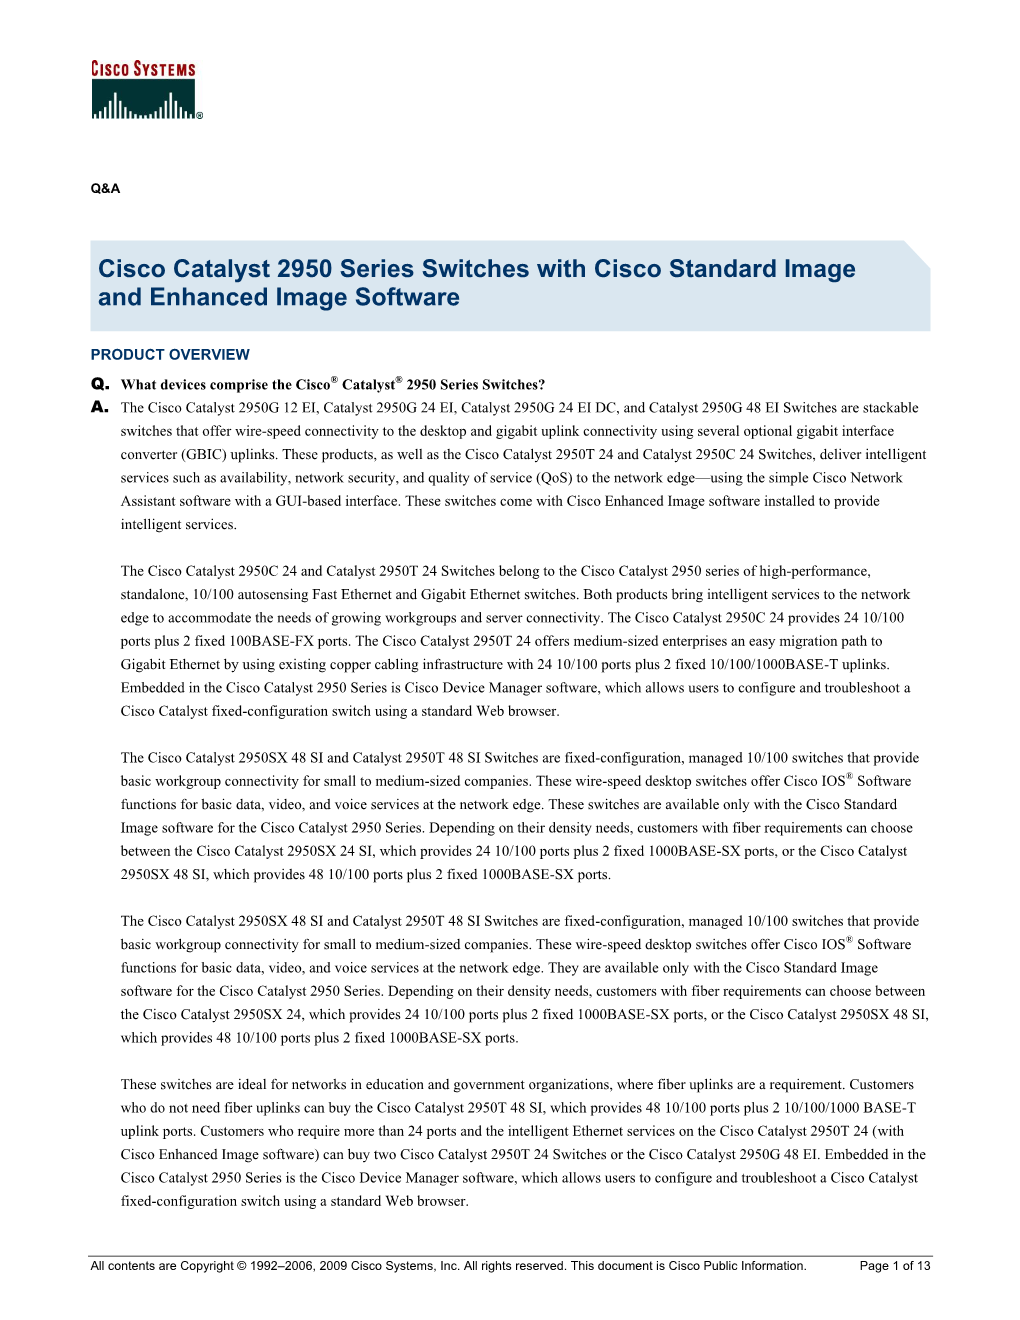 Cisco Catalyst 2950 Series Switches with Cisco Standard Image and Enhanced Image Software